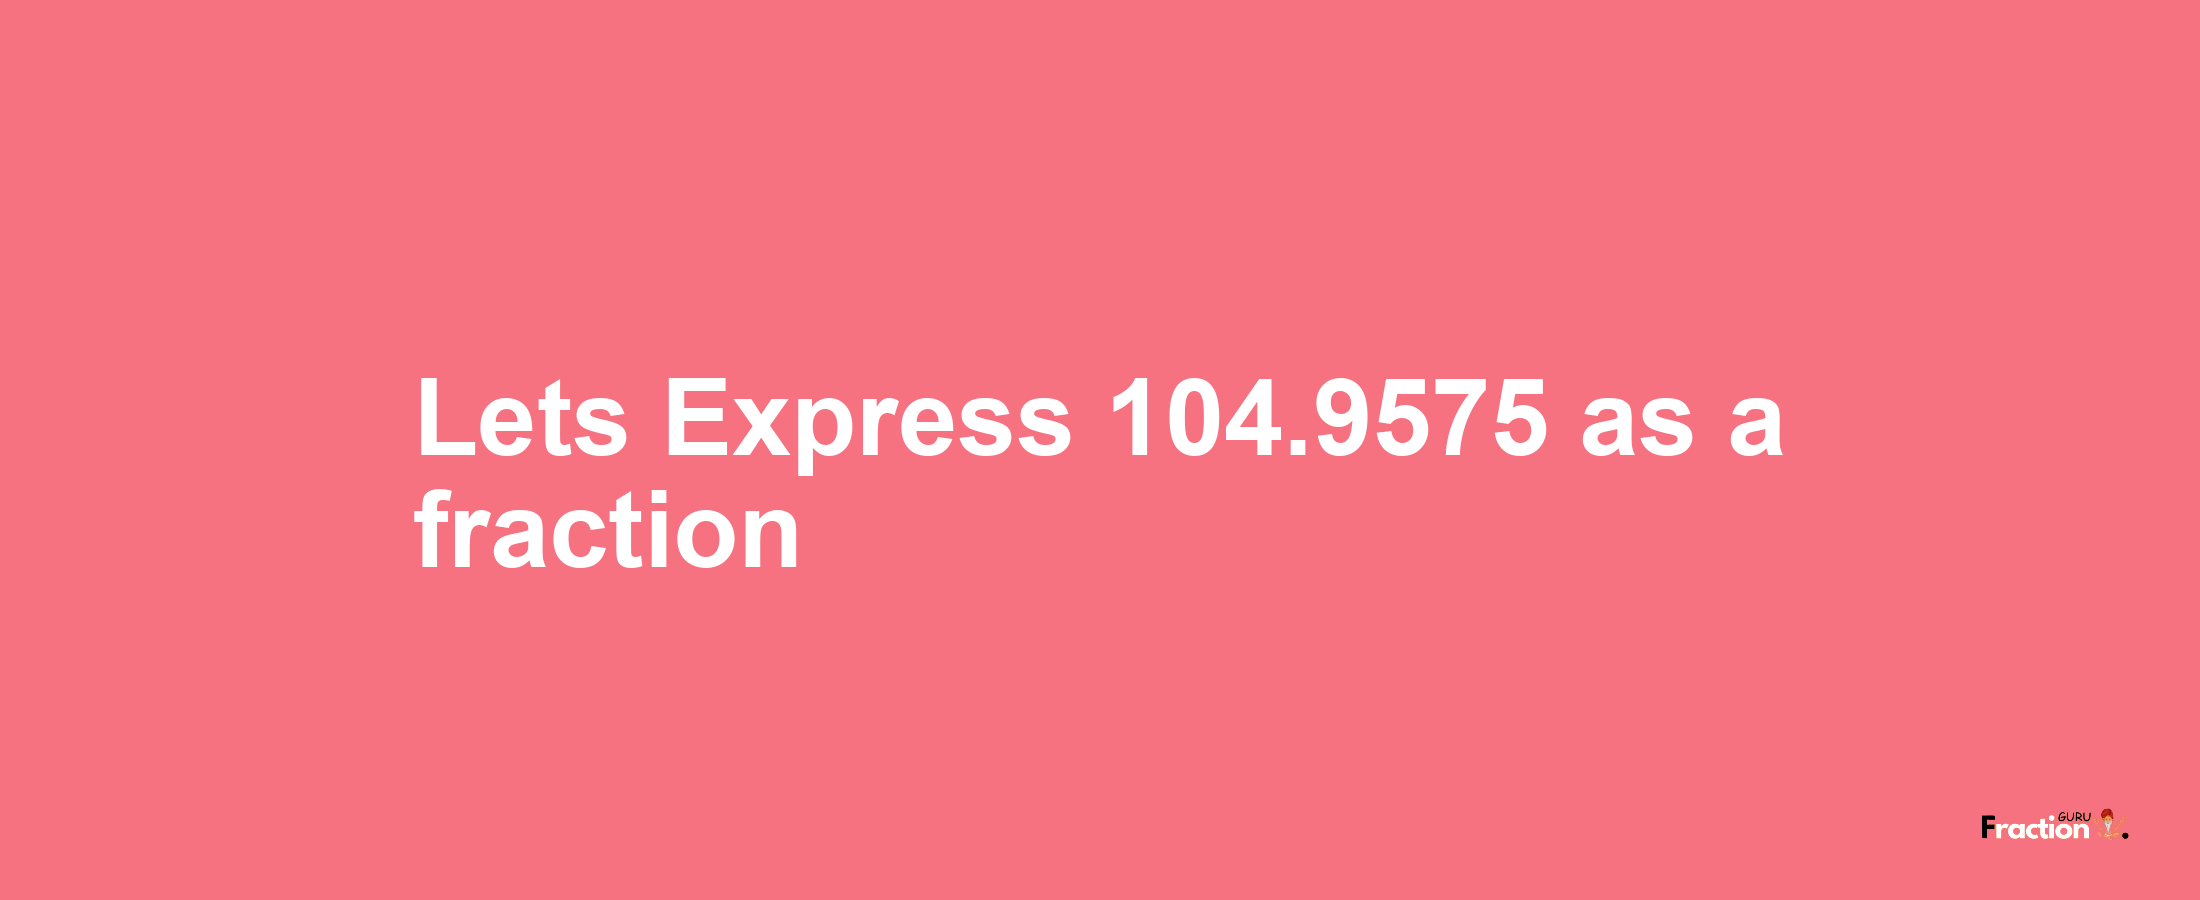 Lets Express 104.9575 as afraction